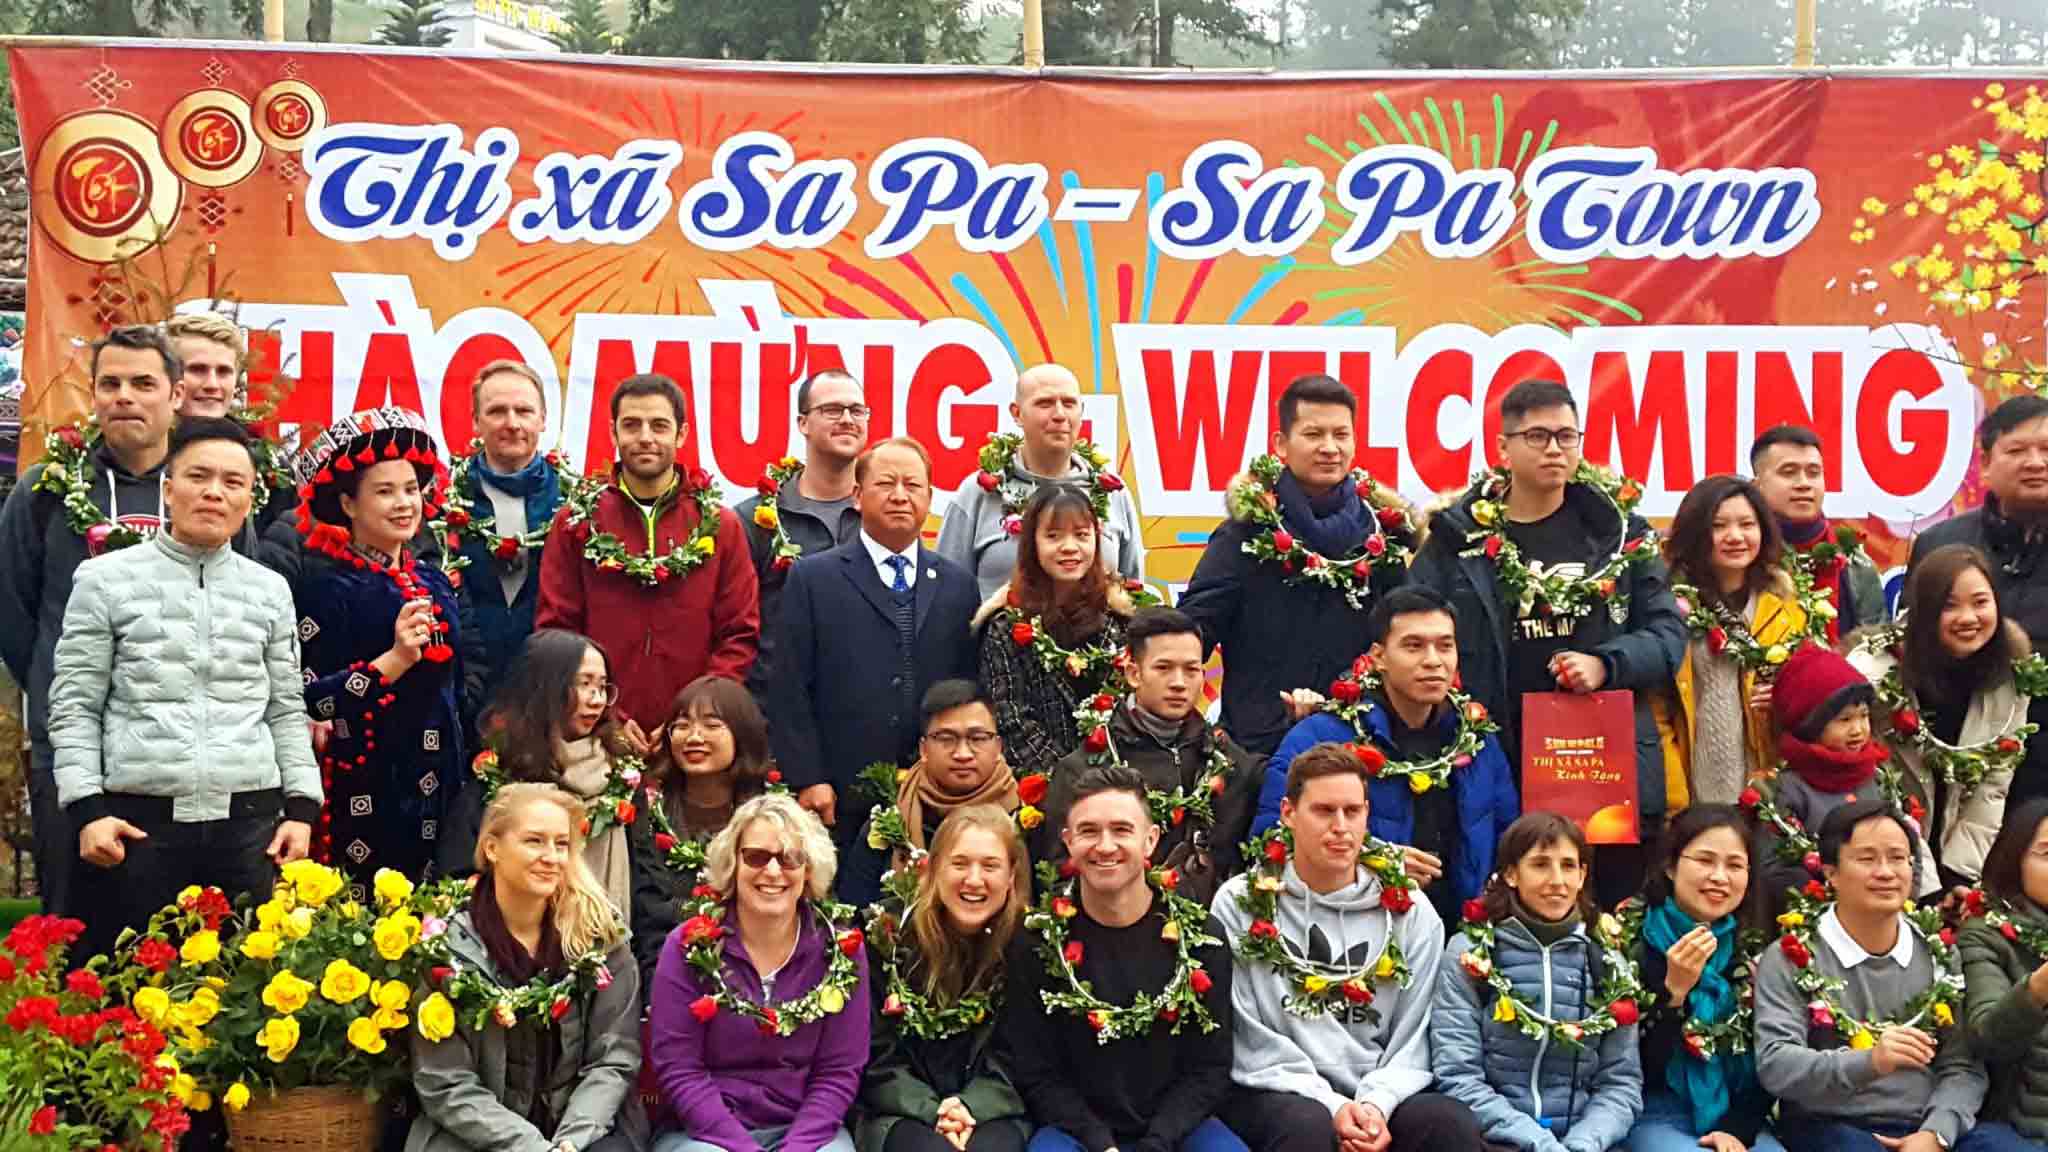 Sa Pa, Lao Cai welcomes the first group of tourists in 2021